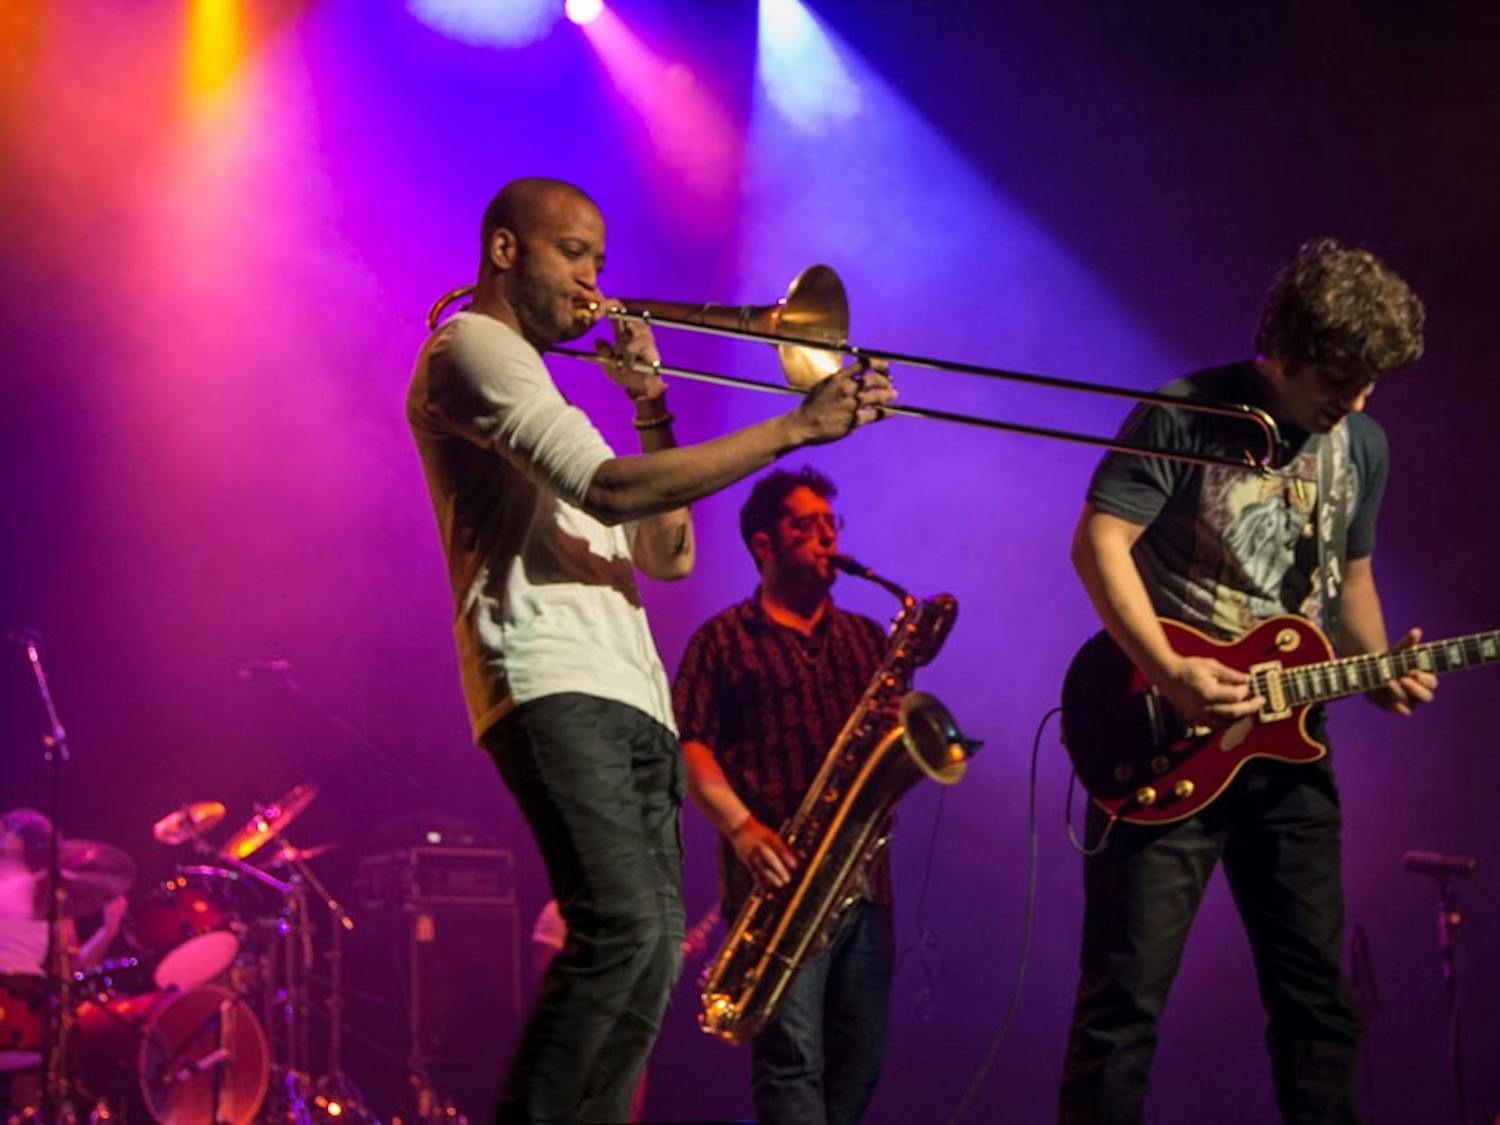 Troy Andrews, better known as Trombone Shorty, rocked the CFA Monday night. He and his band Orleans Avenue played for a sold out crowd of over 1100 people.